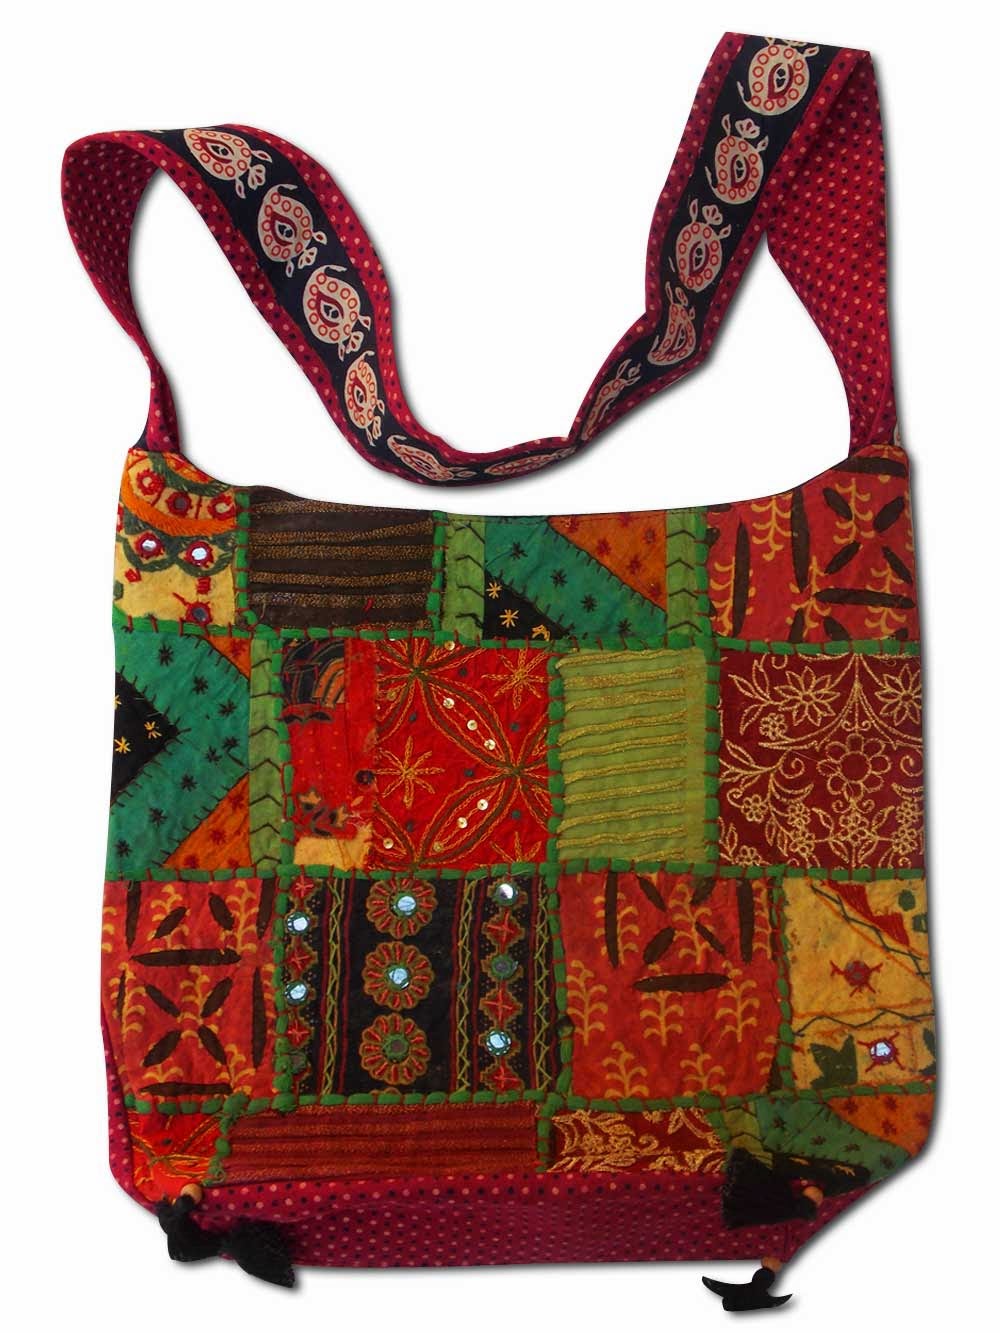 Patchwork Handmade Handbag in multicolor with embroidery ~ Ethnic ...